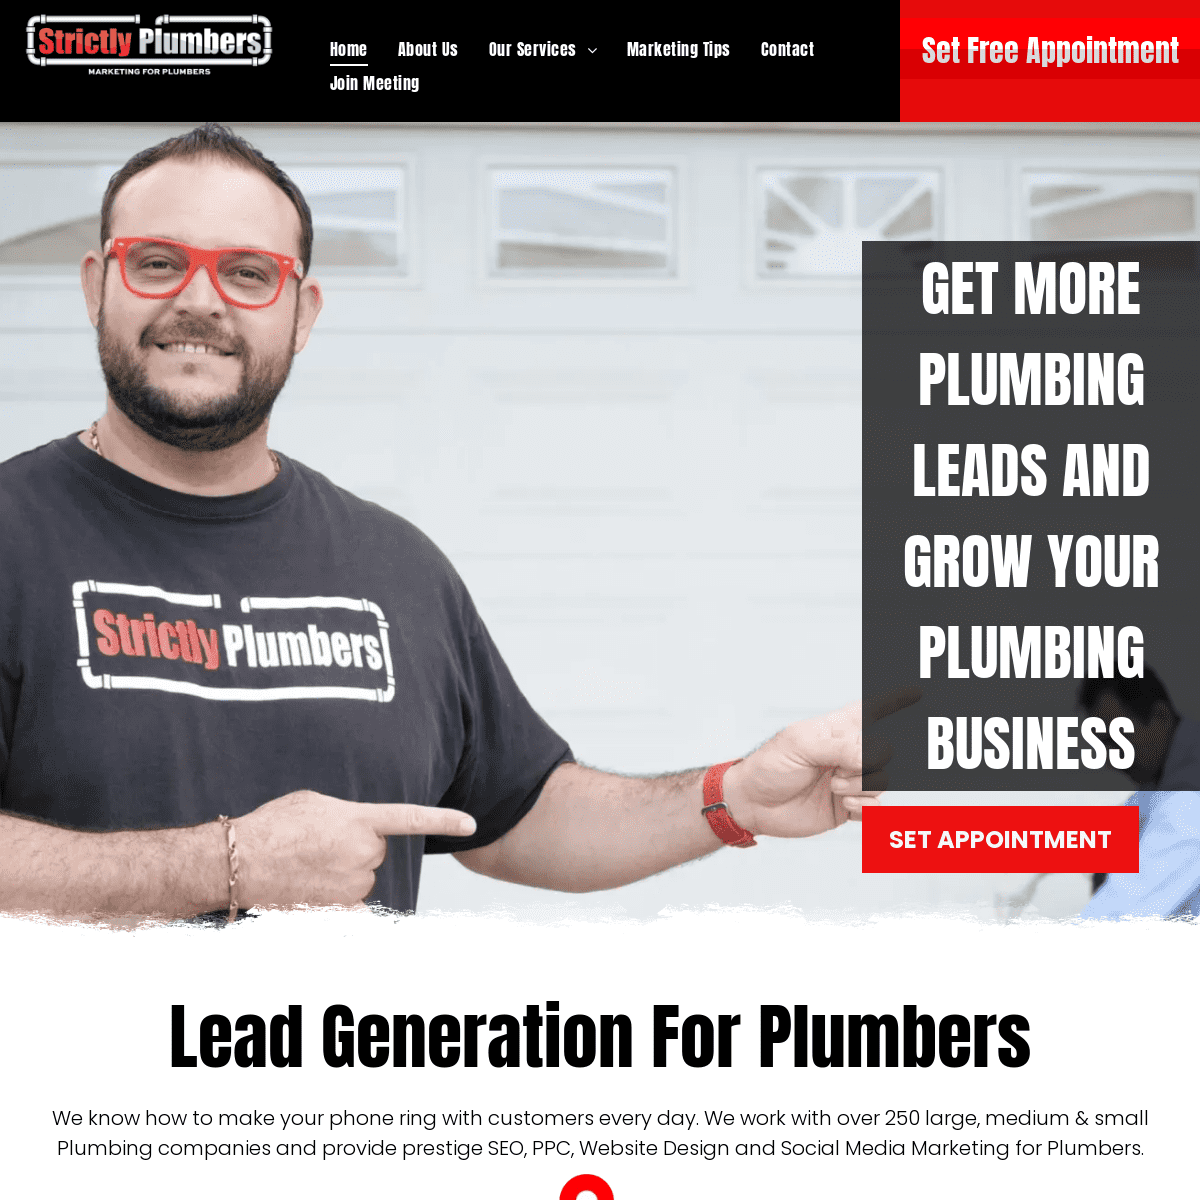 A complete backup of https://strictlyplumbers.com